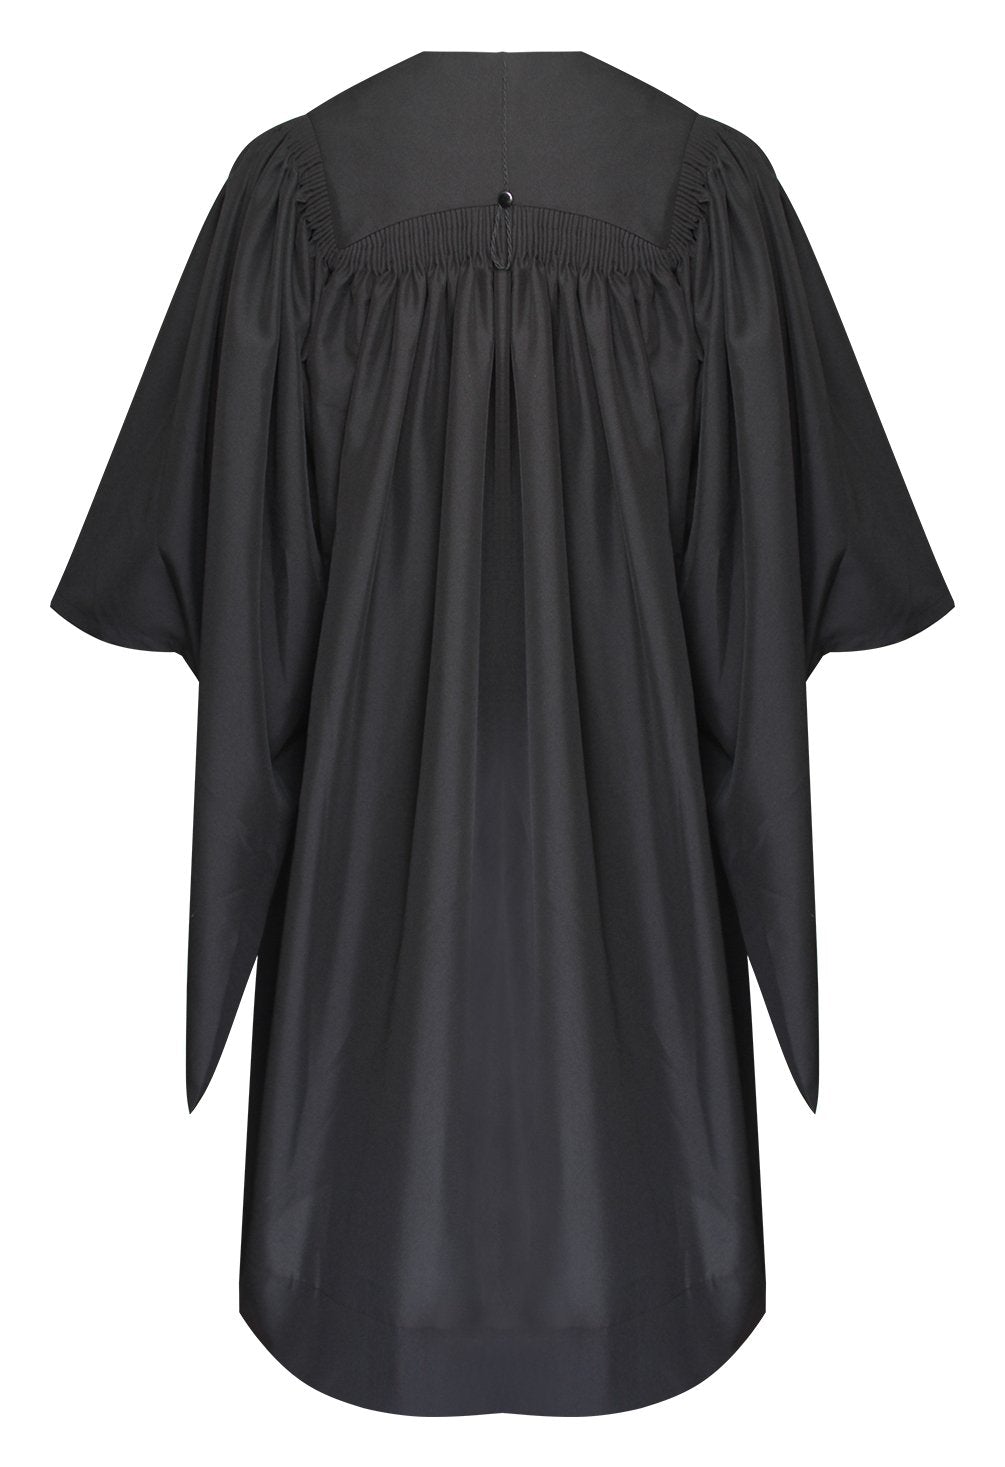 American Deluxe Masters Graduation Gown - Graduation Gowns UK